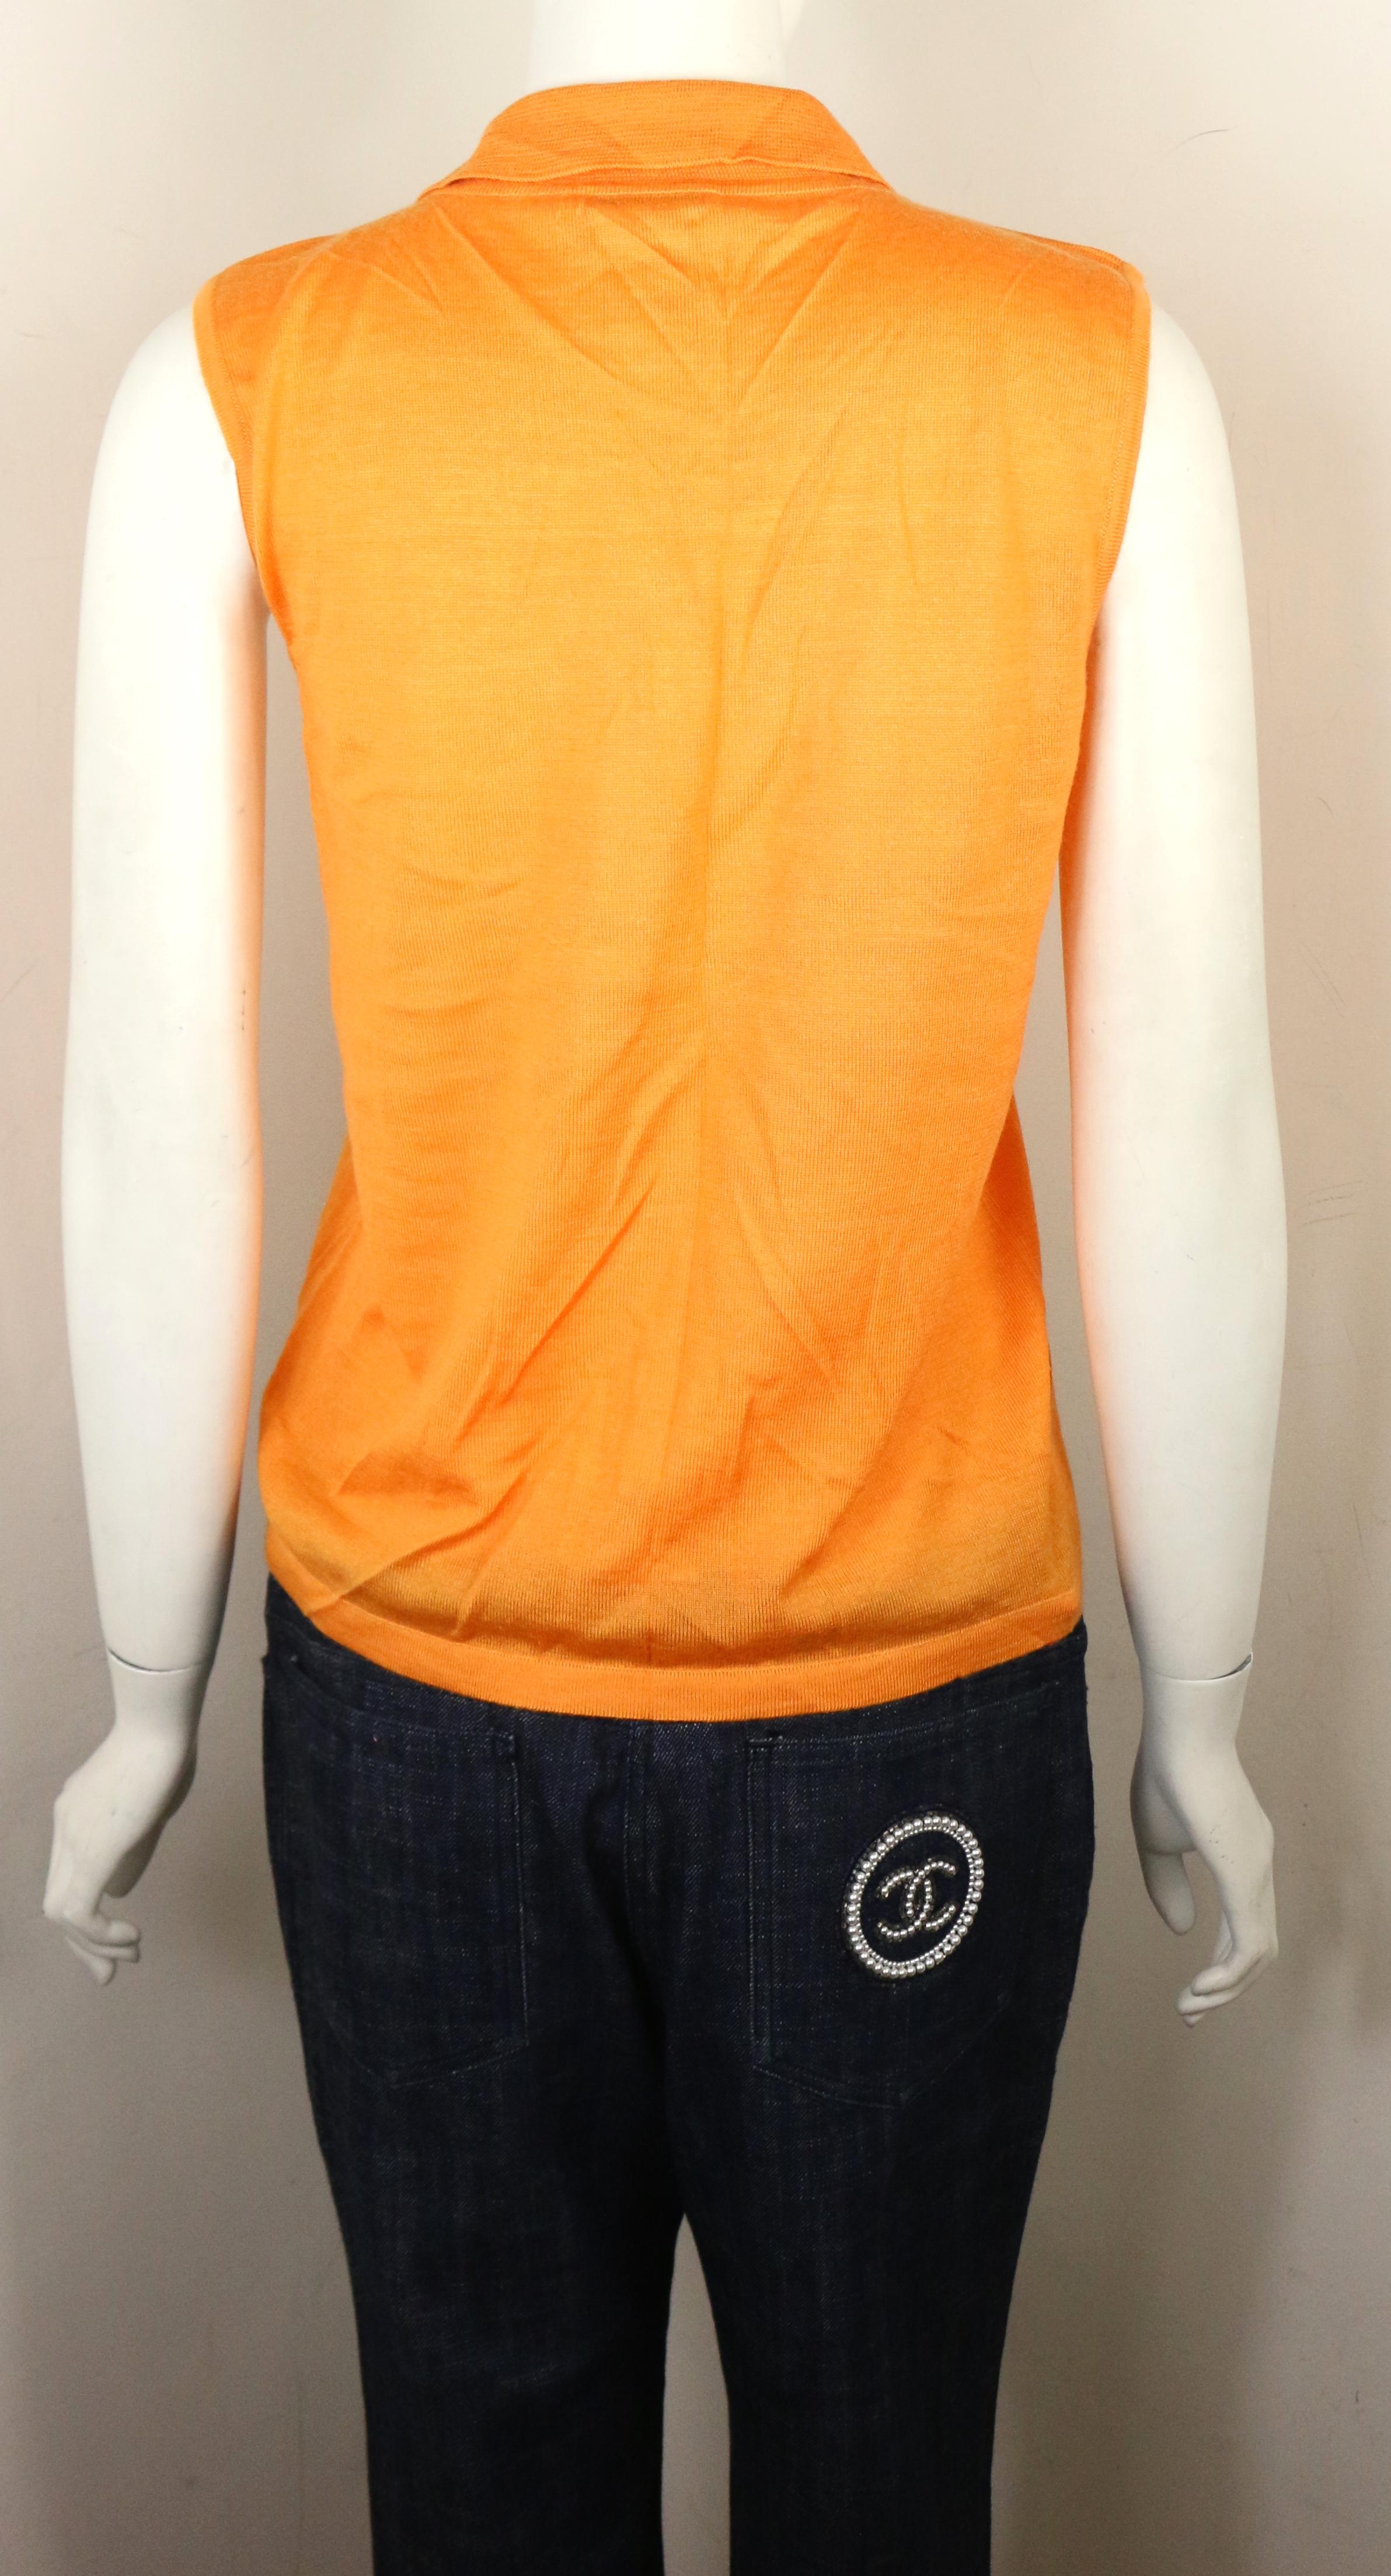 - Chanel orange cashmere and silk sleeveless collar top from the year 2000C collection. 

- SIze 42. 

- 70% Cashmere, 30% Silk. 

